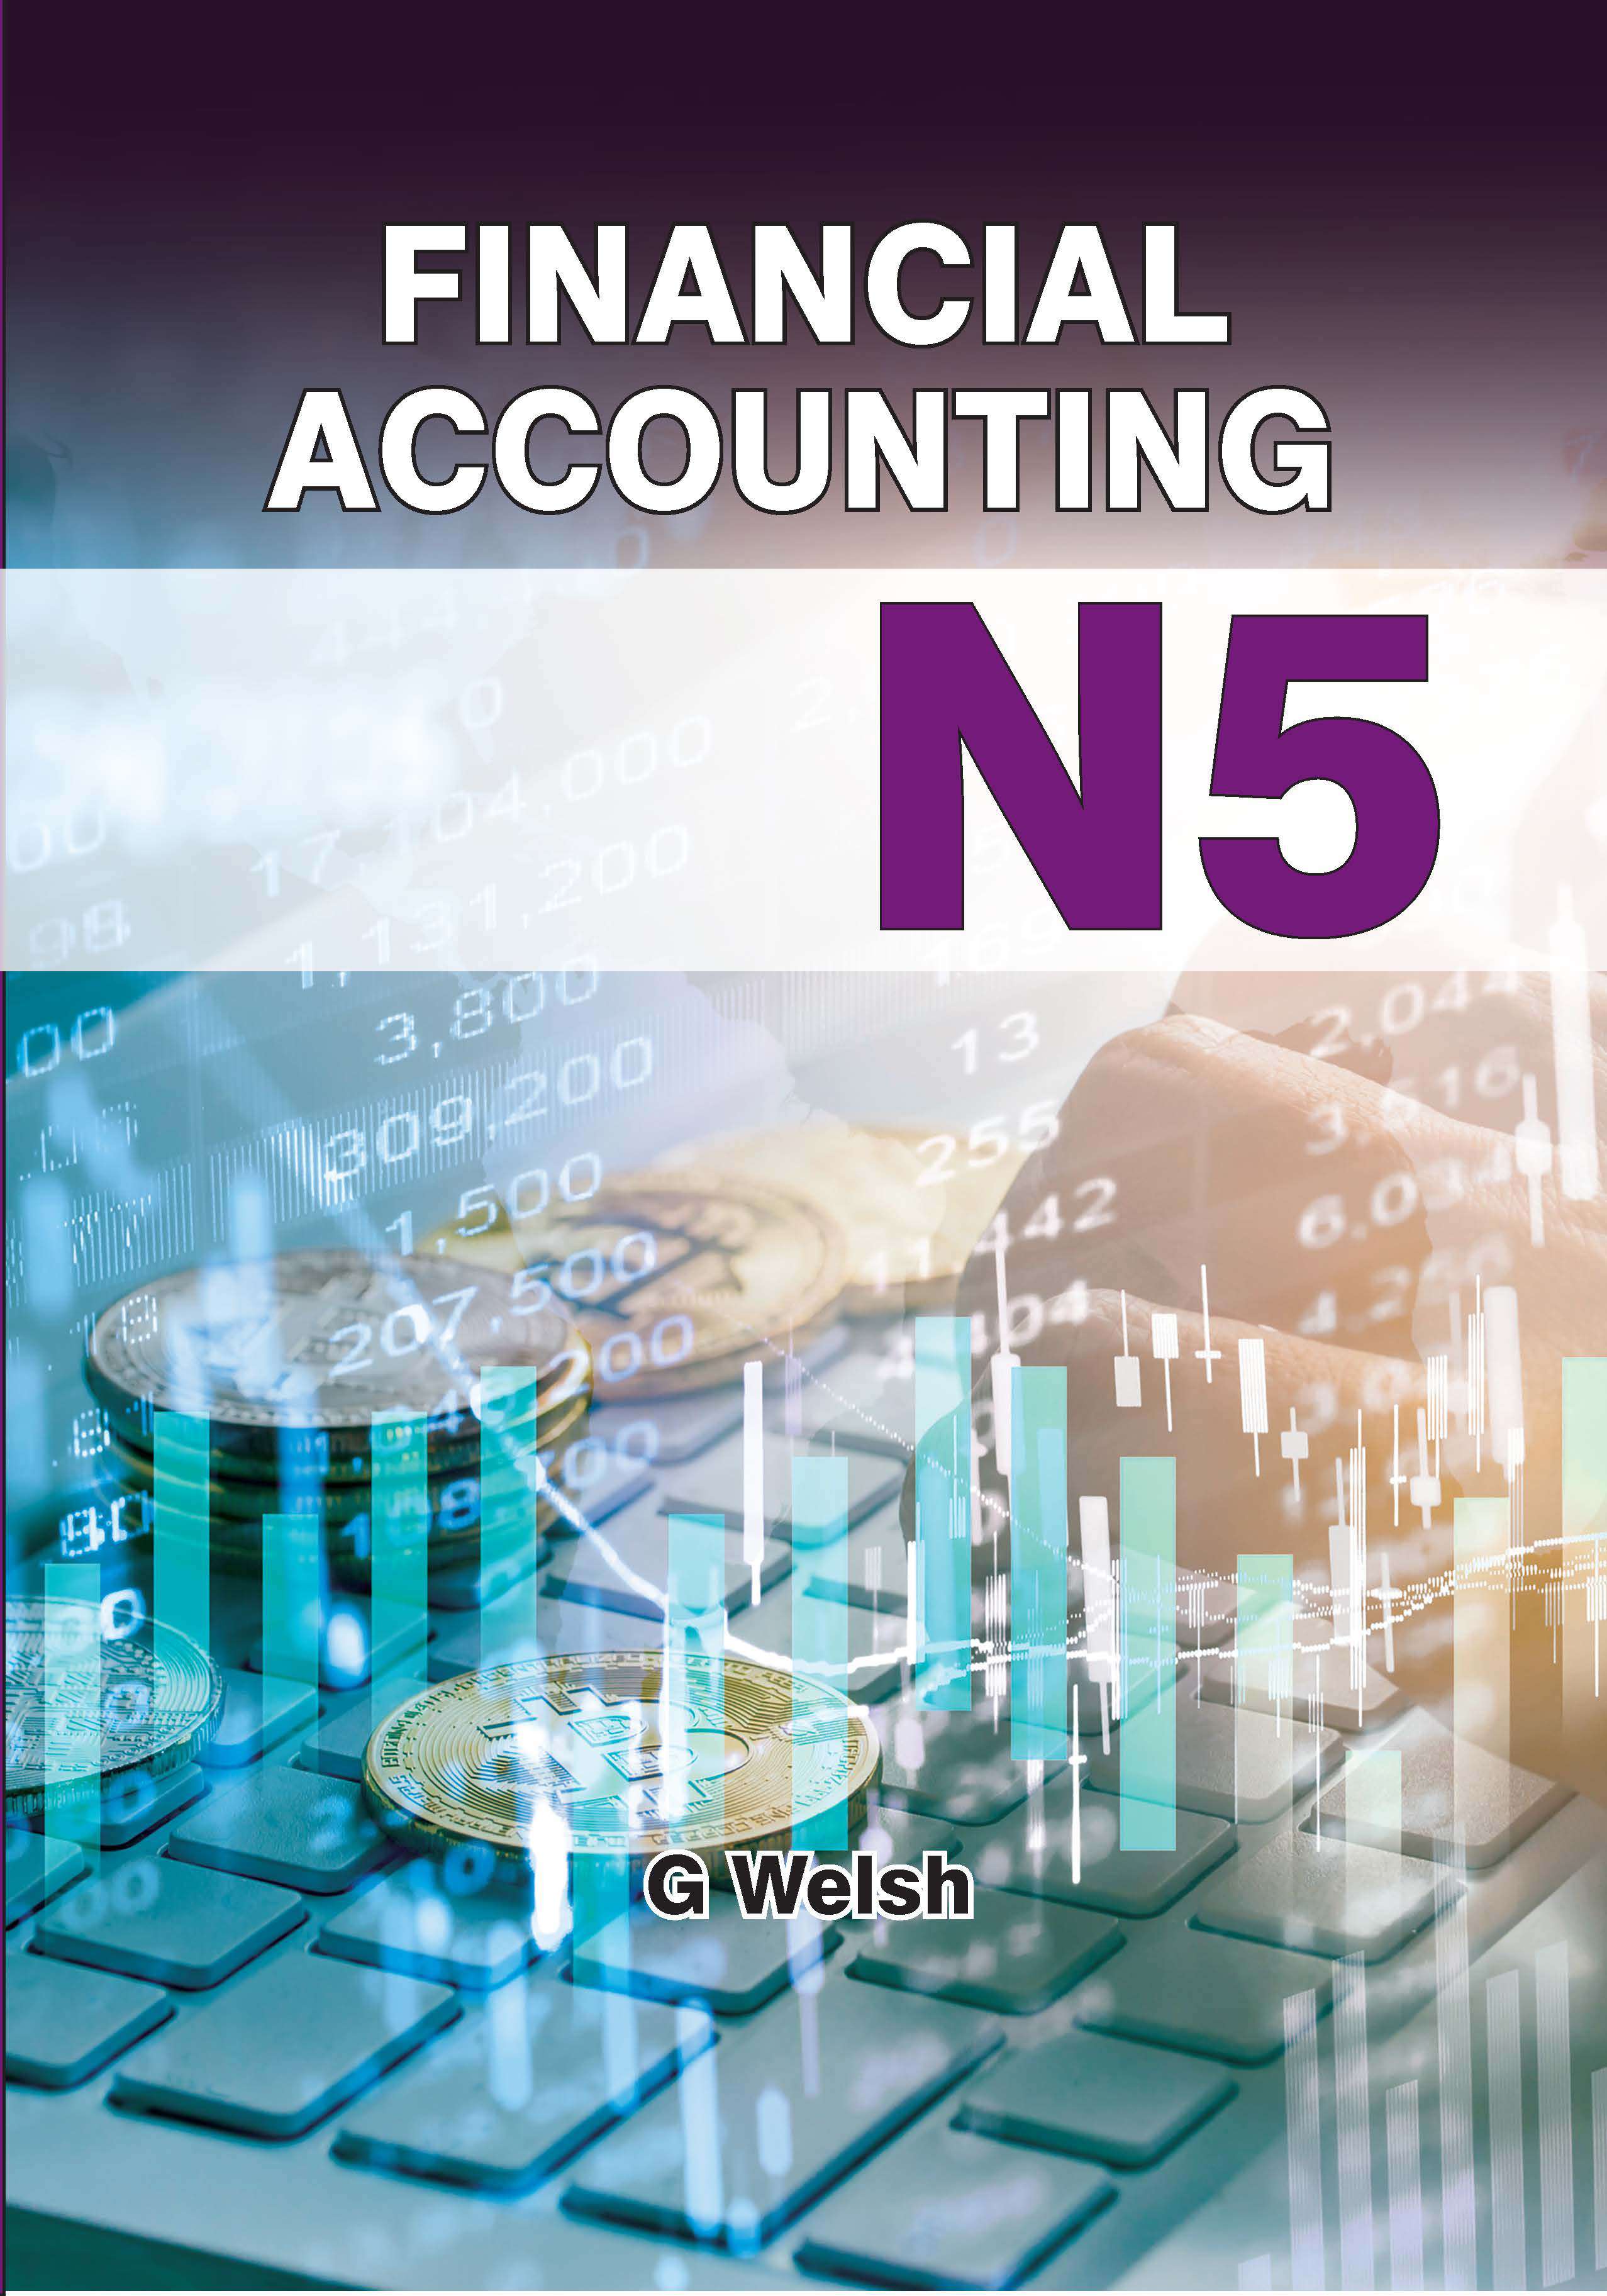 SHUTERS FINANCIAL ACCOUNTING N5 STUDENT TEXTBOOK Cover